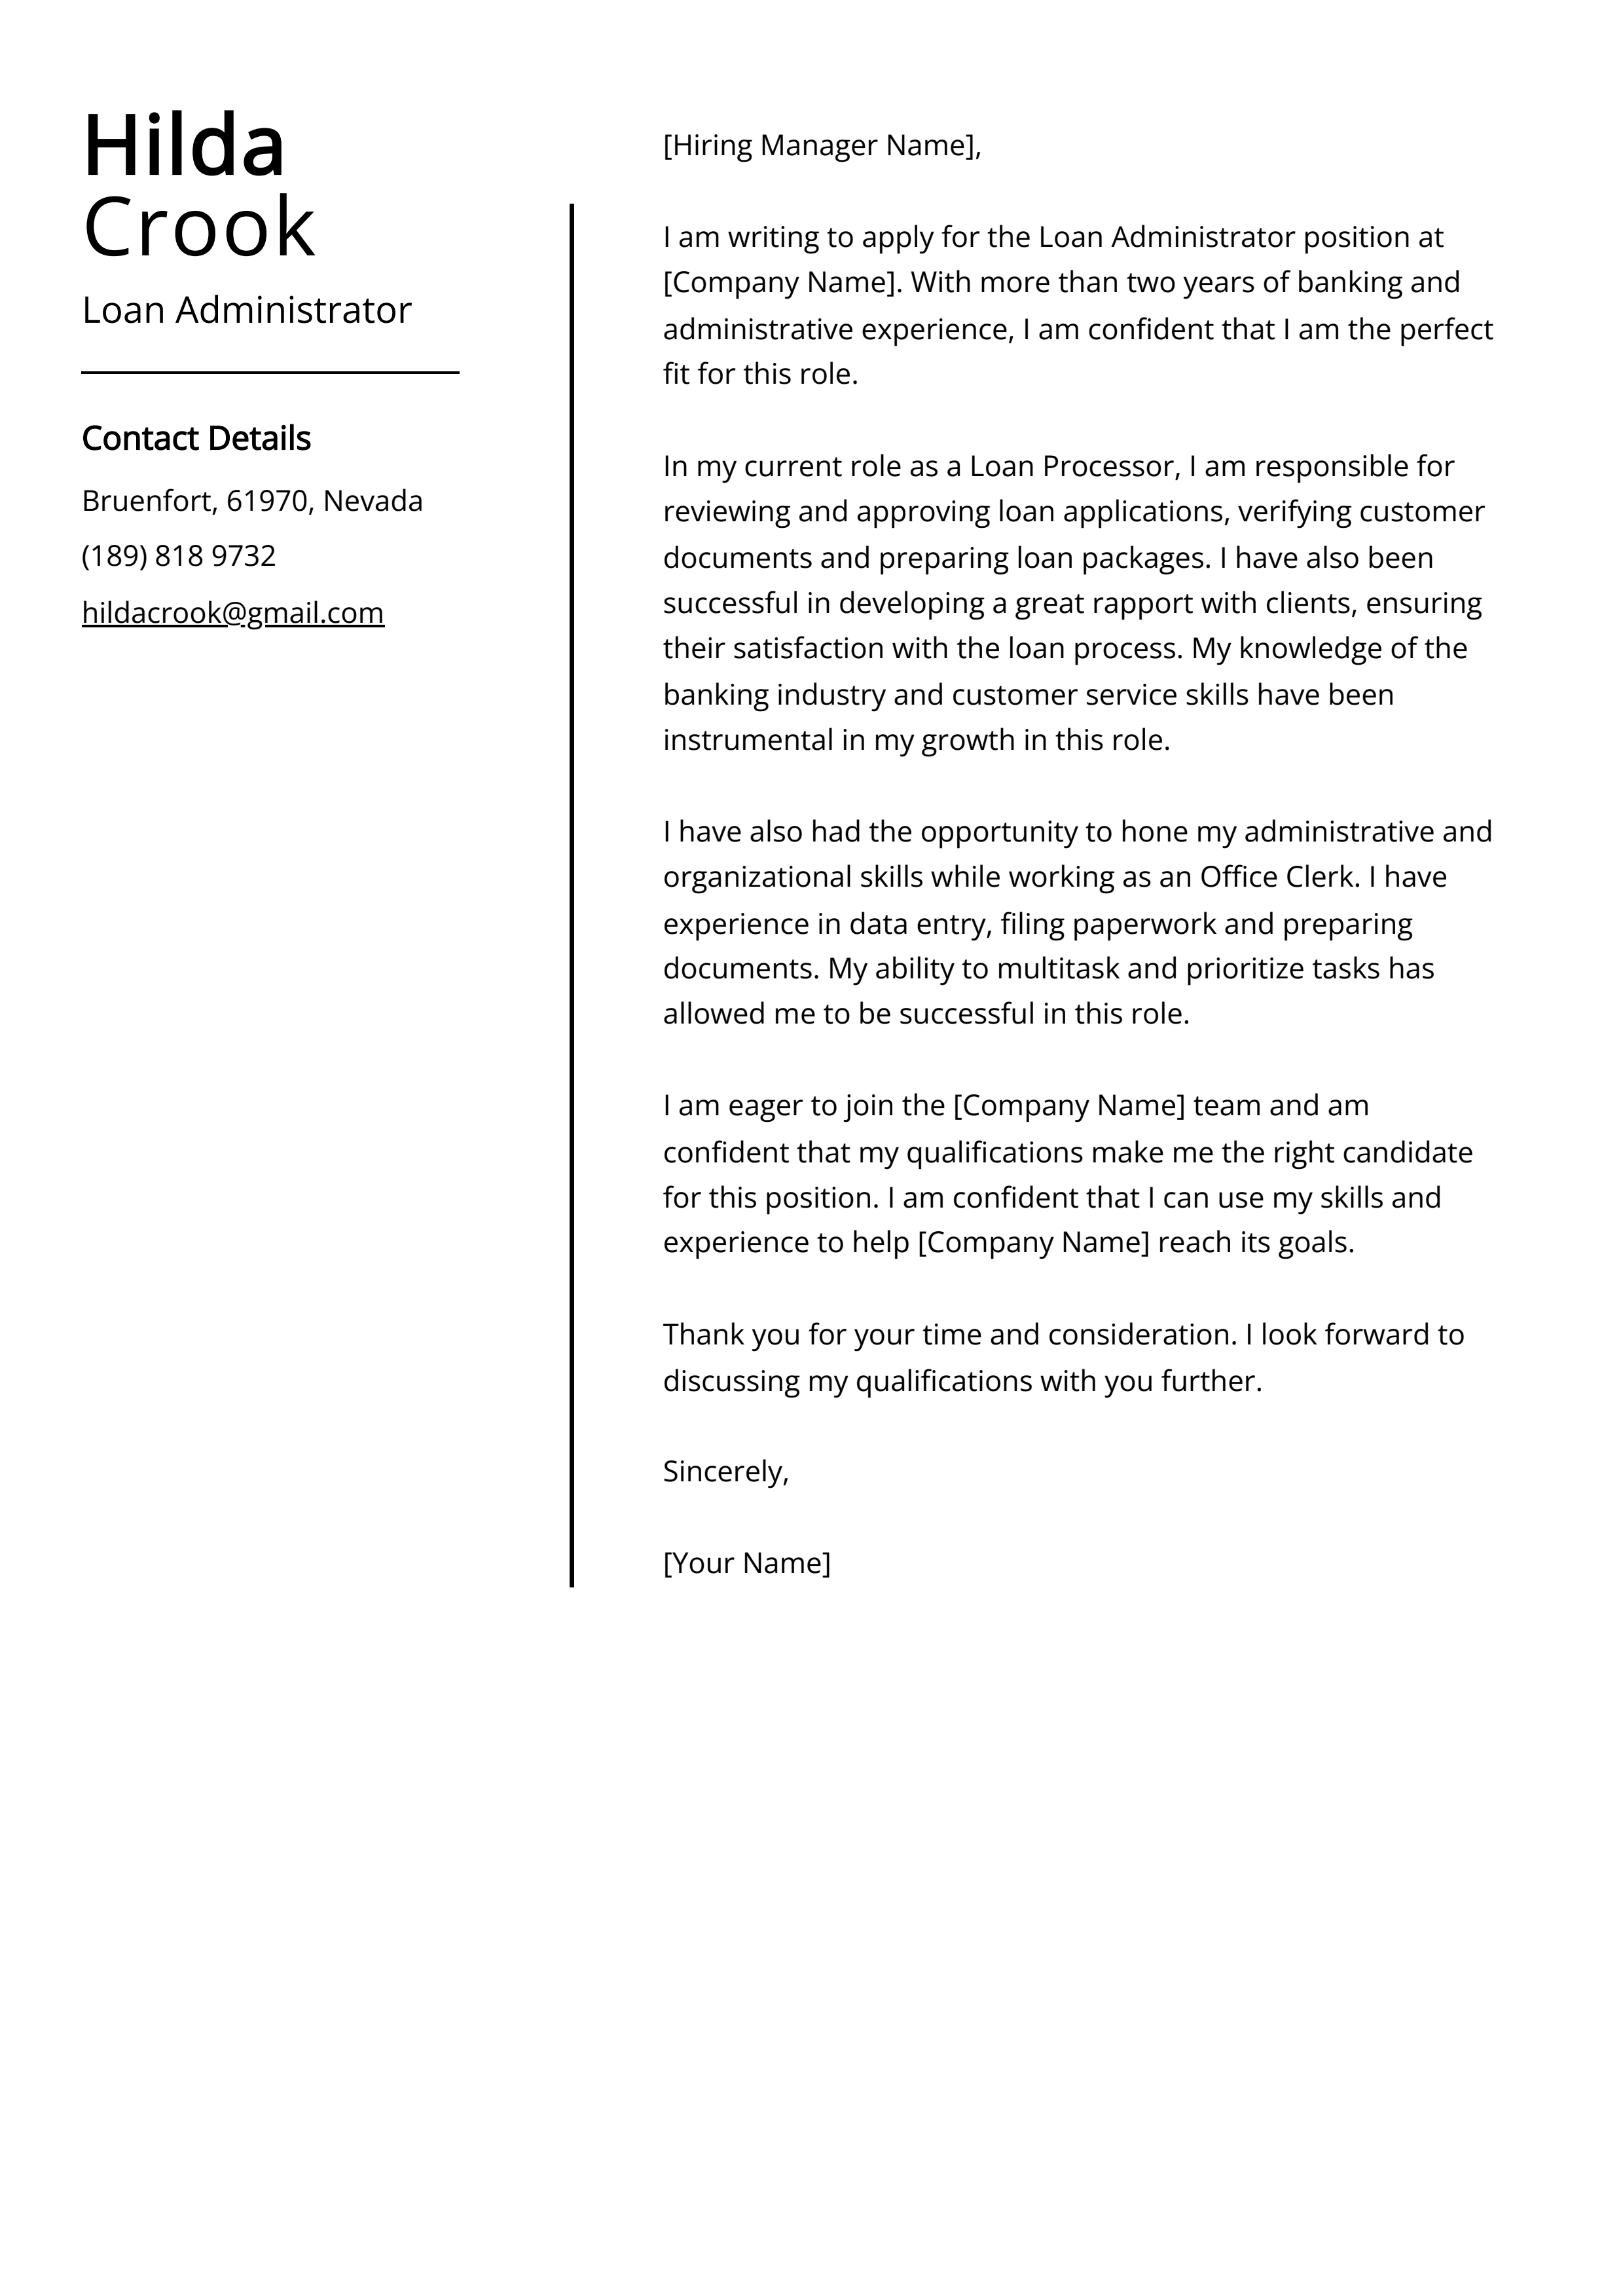 Loan Administrator Cover Letter Example